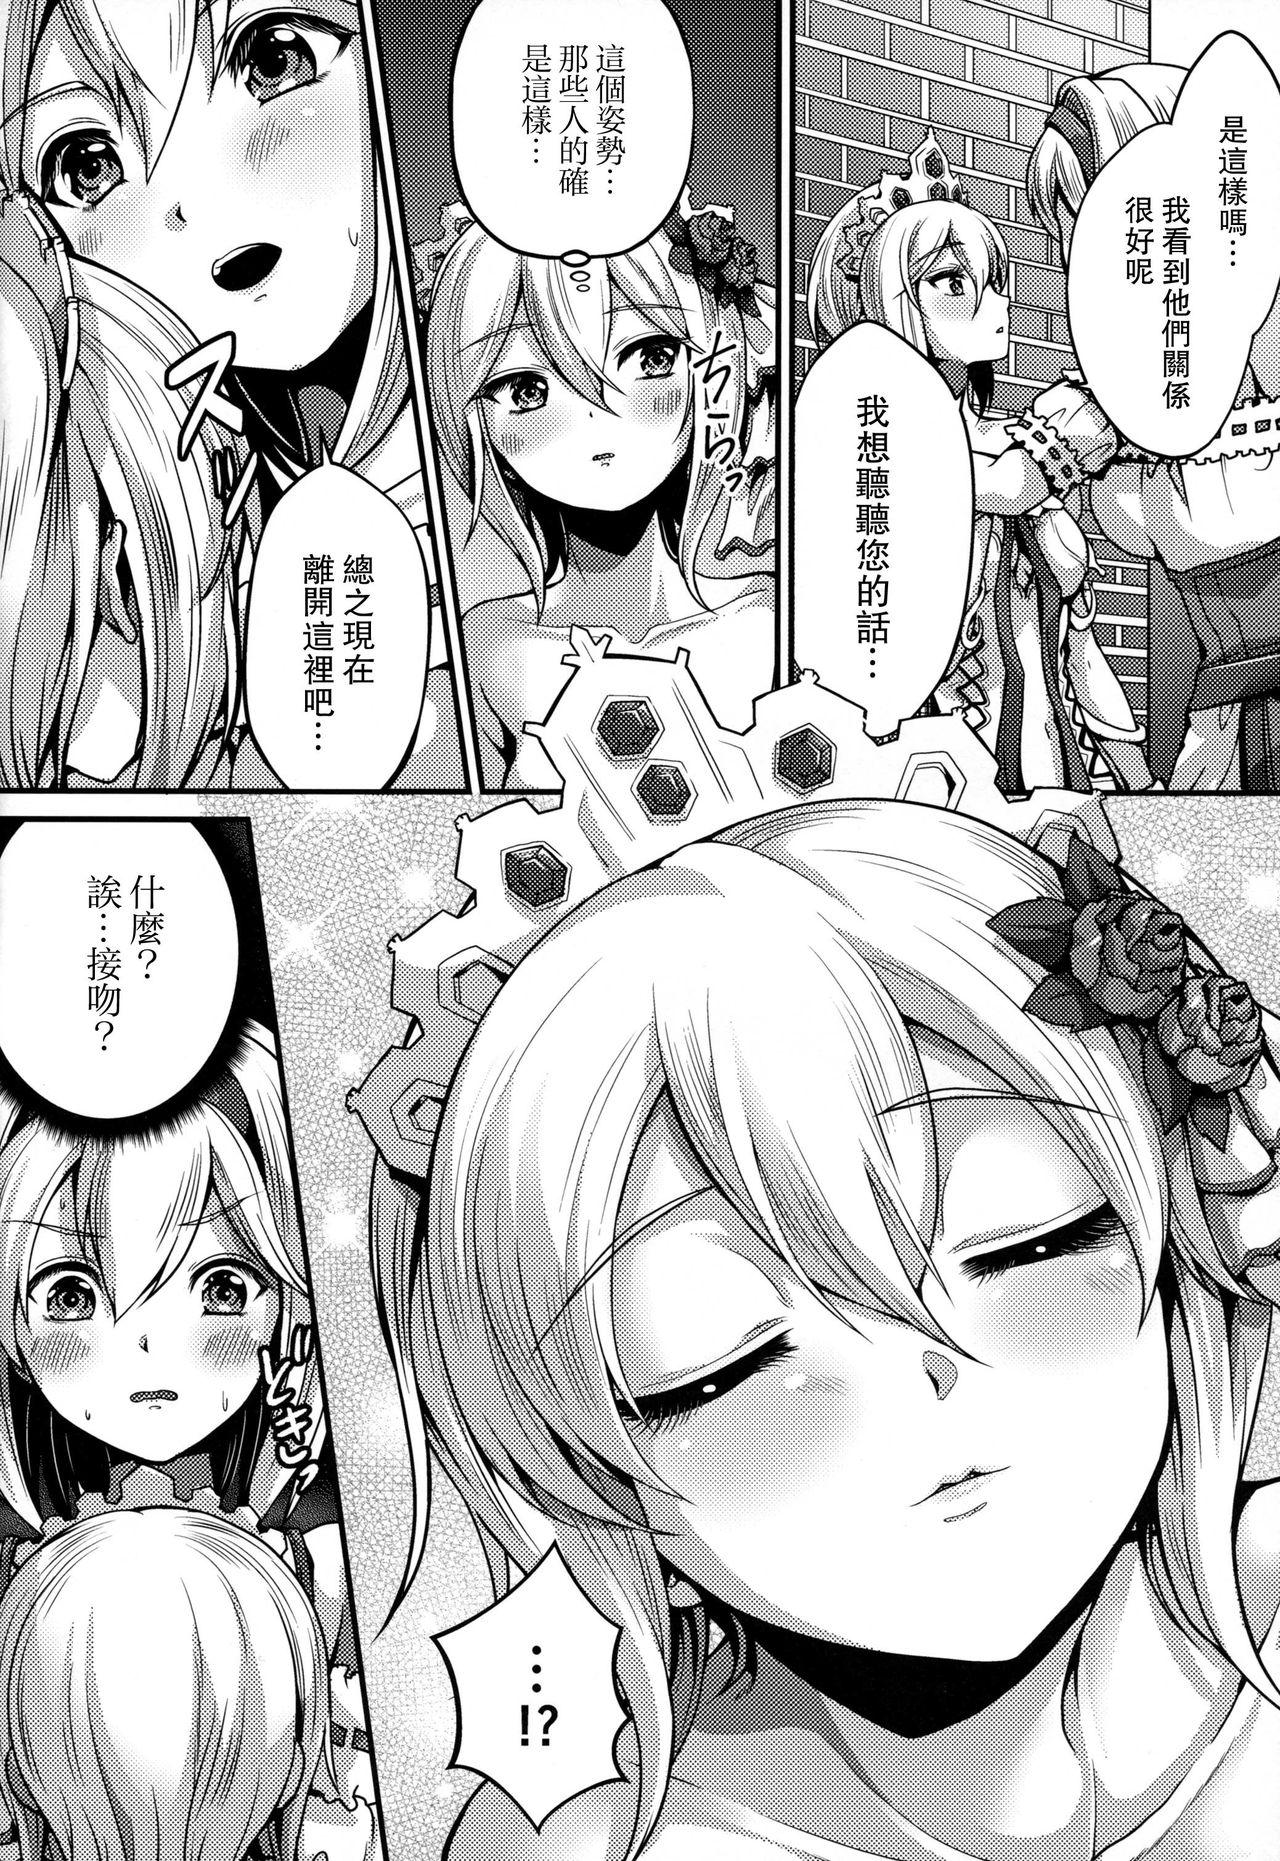 Slapping Princess is Seeking Unknown - Granblue fantasy Lover - Page 5